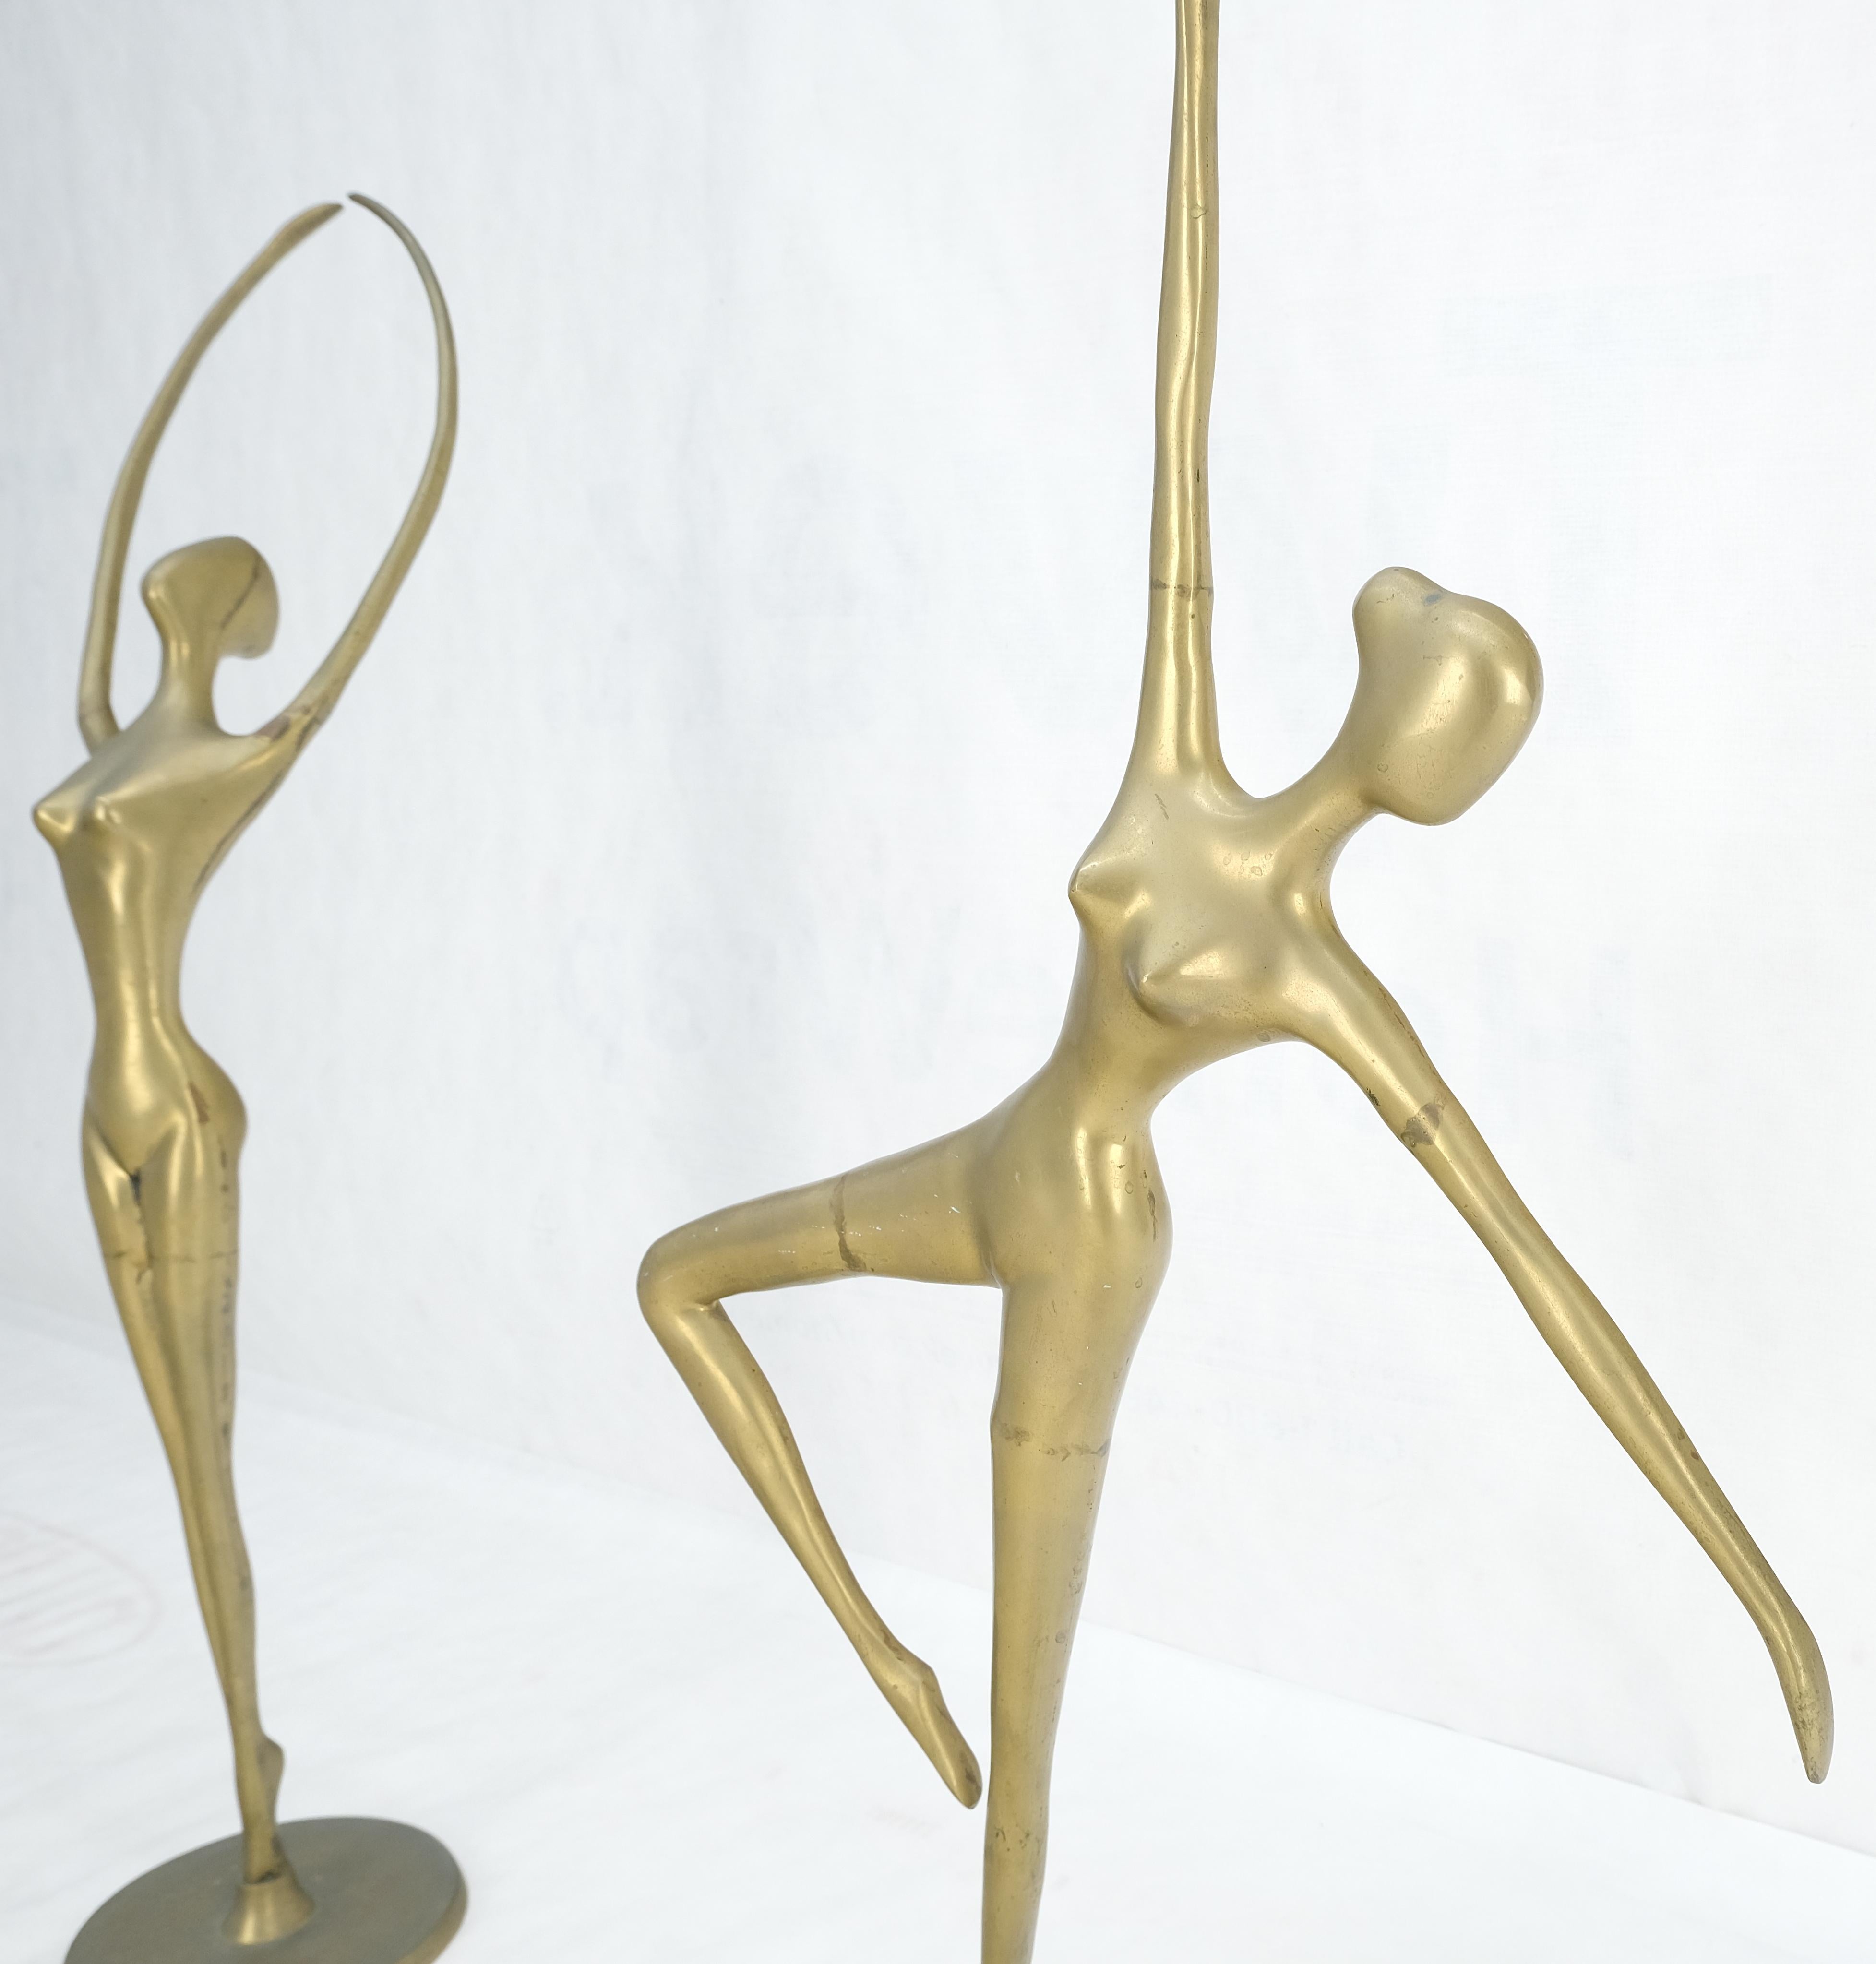 20th Century Pair of 3 Foot Tall Solid Brass Ballerina Dancers Sculptures Figurines Statue  For Sale